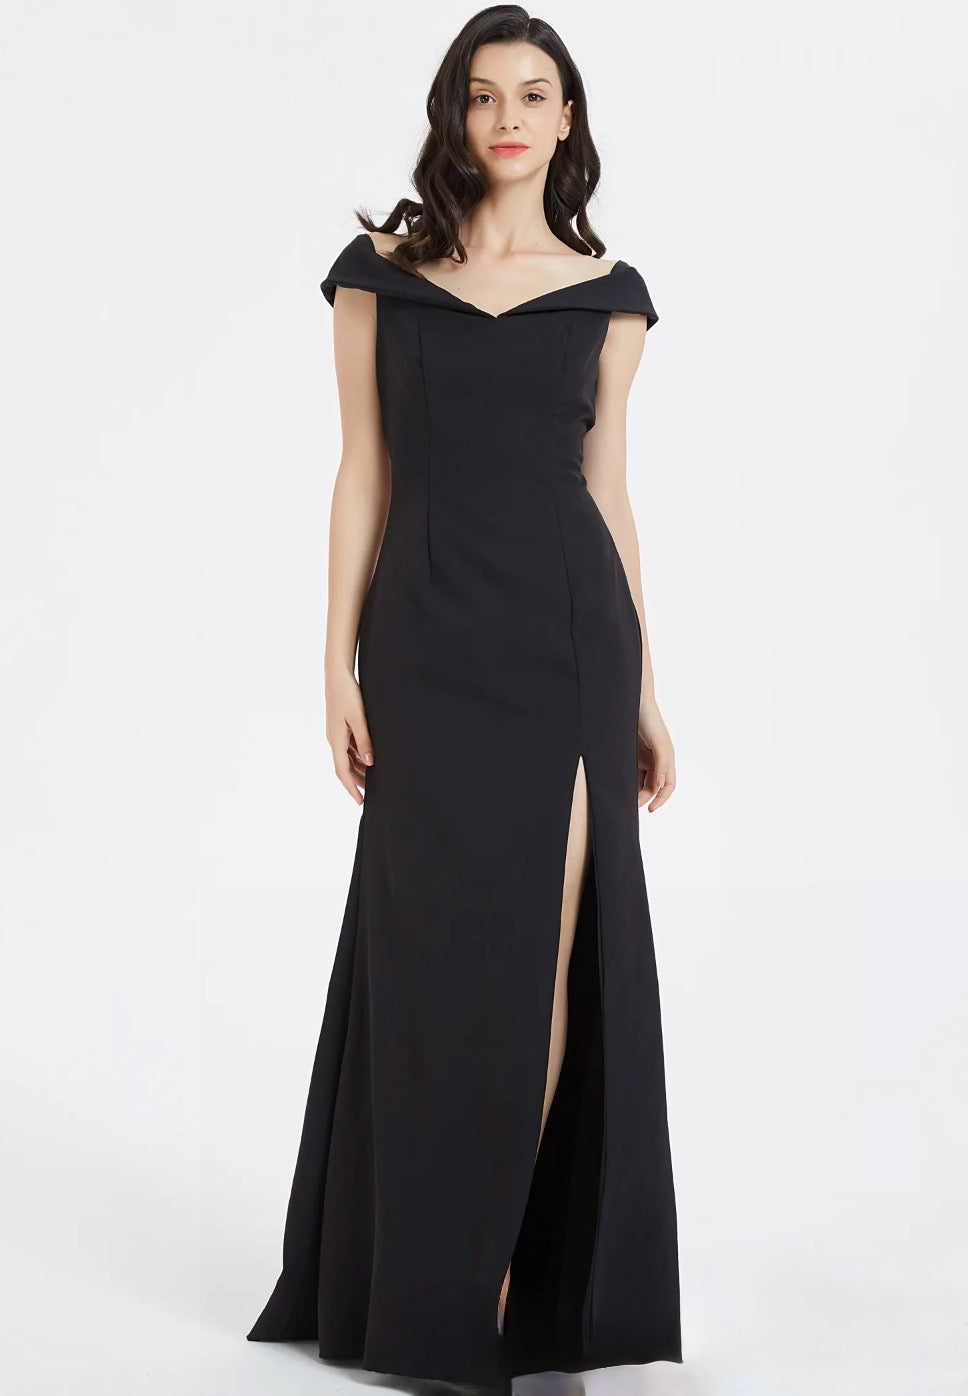 Buy All About You Belted Maxi Dress - Dresses for Women 21685156 | Myntra